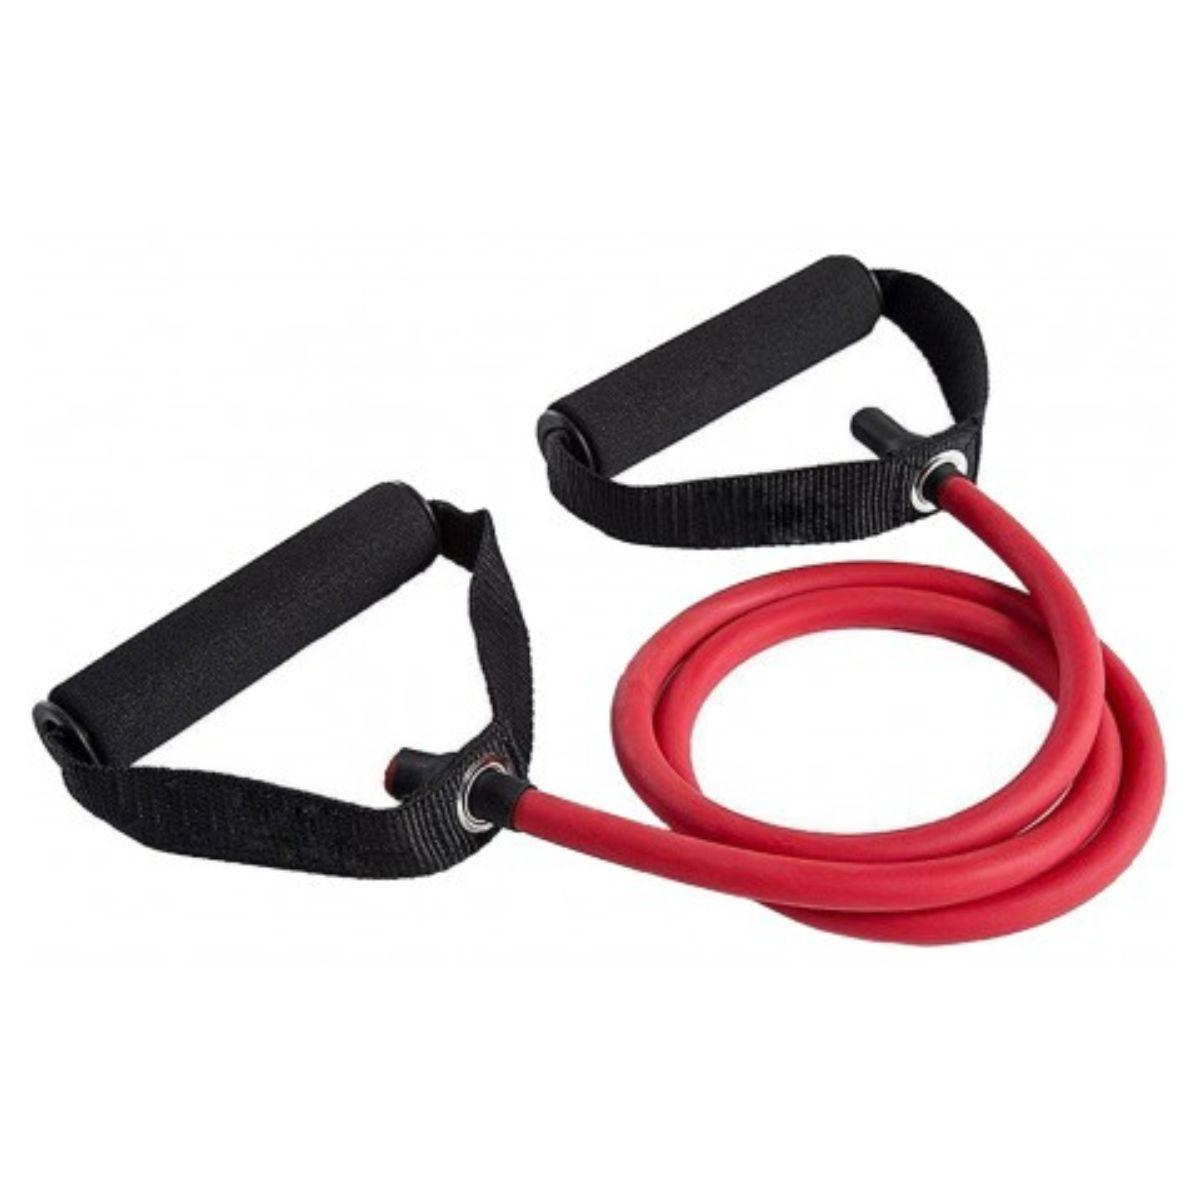 Resistant Band - tcistarhealthproducts